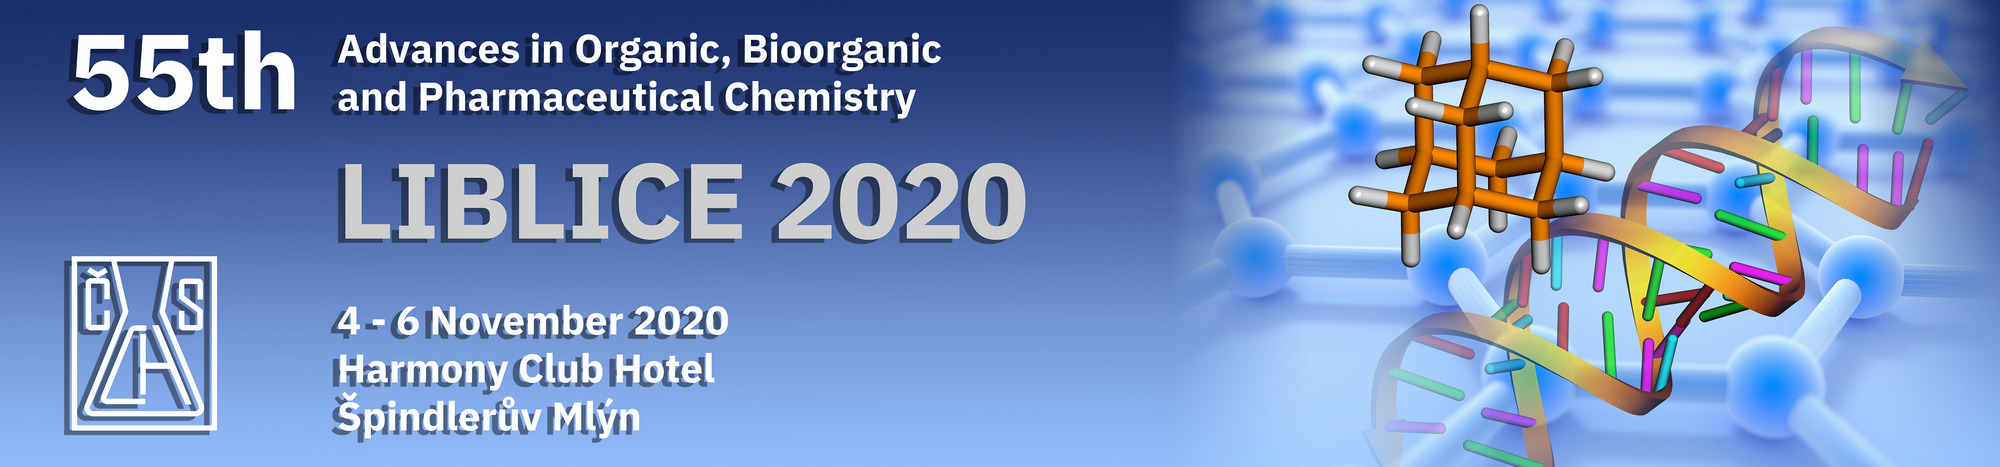 Liblice 2020 – 55th Advances in Organic, Bioorganic and Pharmaceutical Chemistry